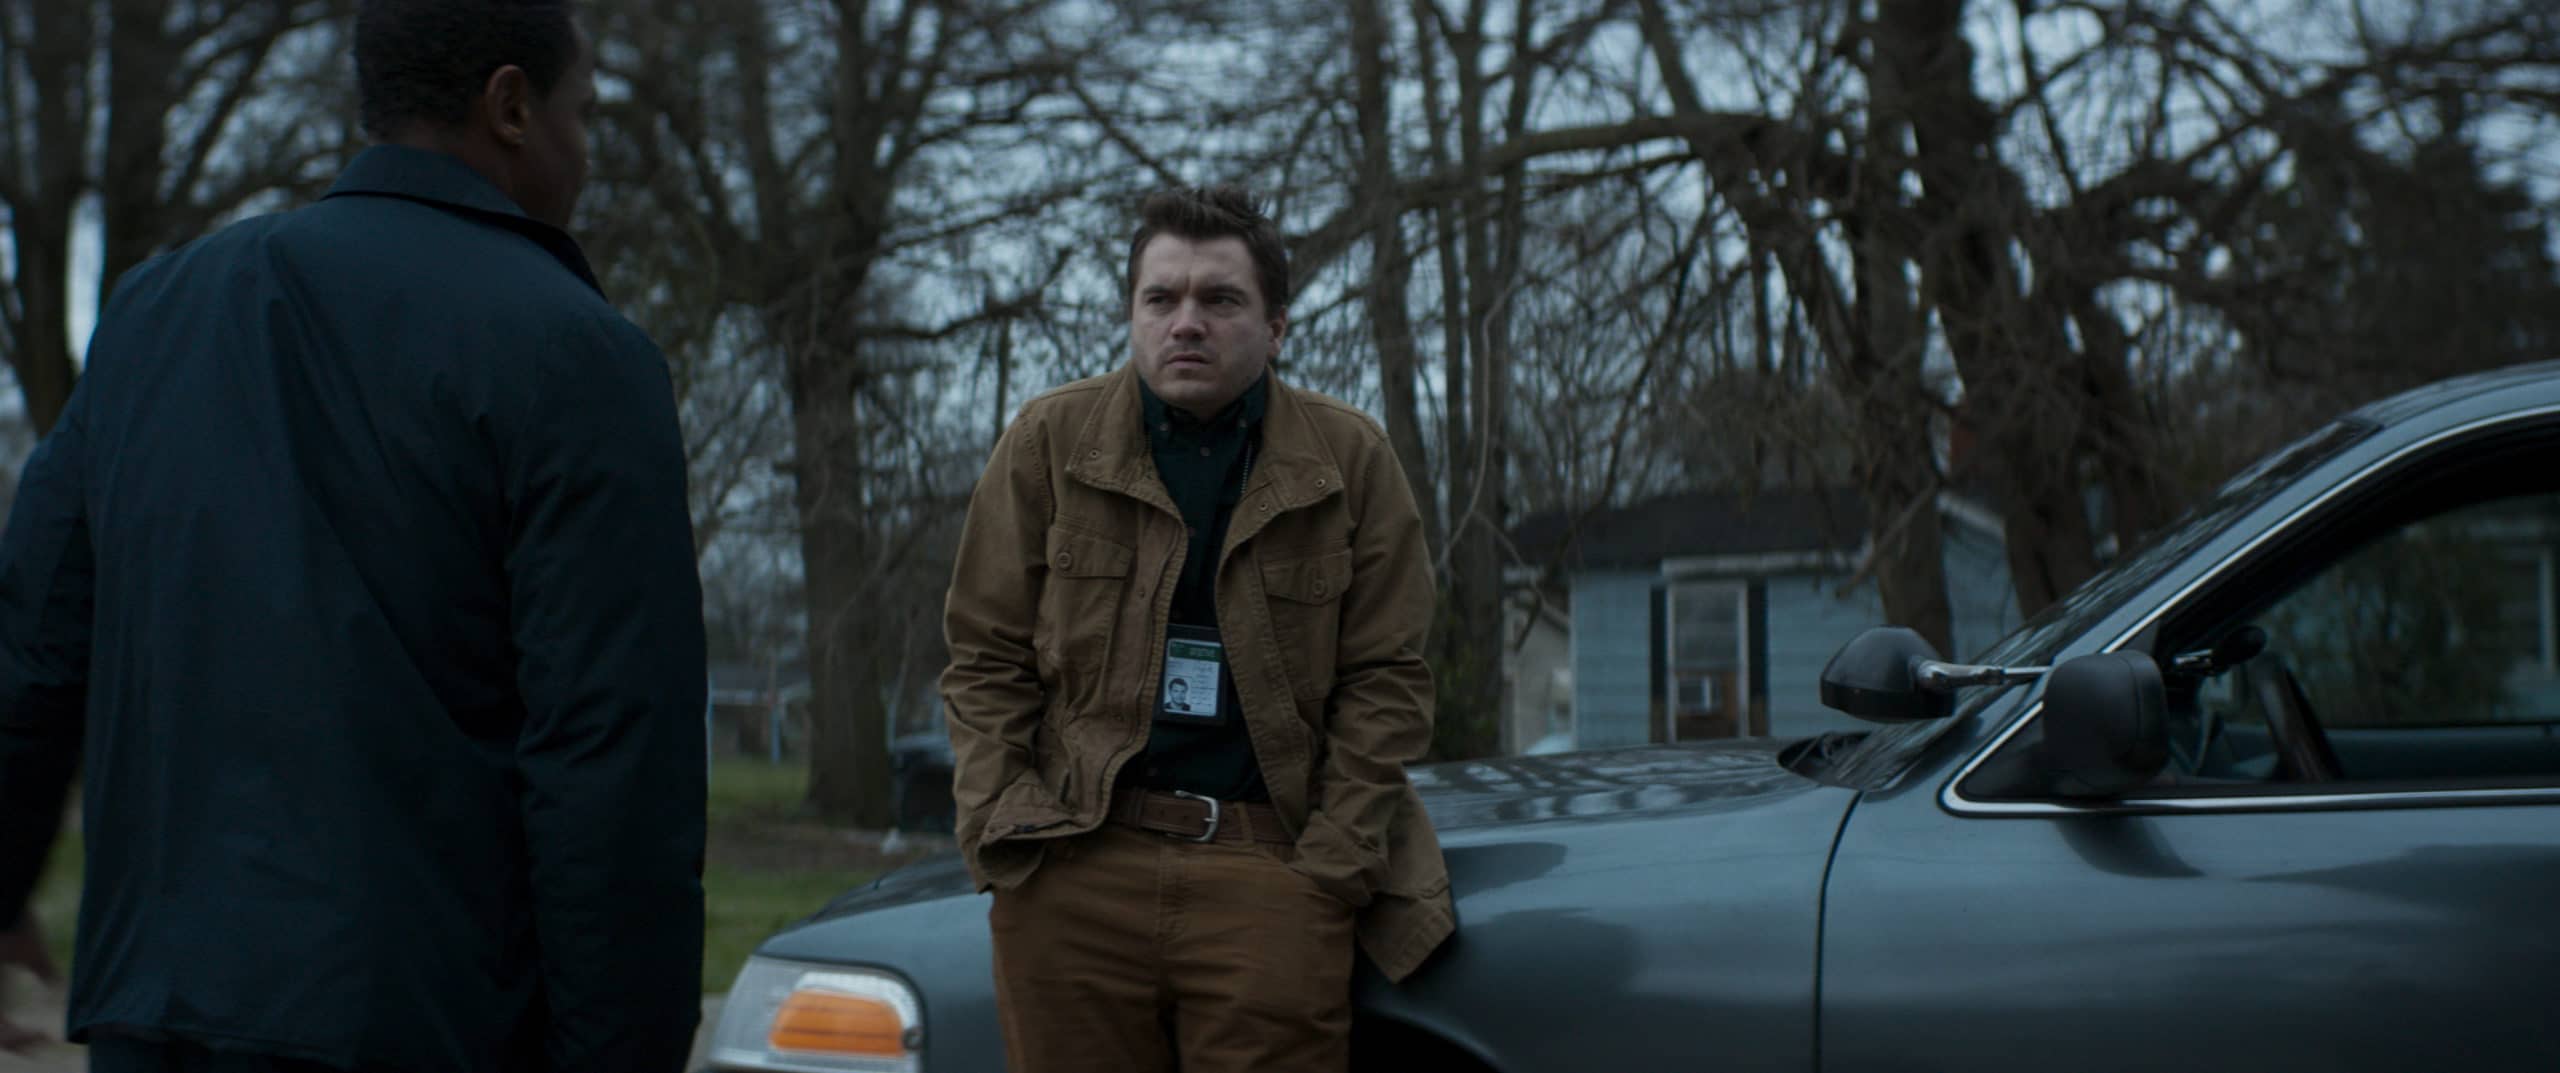 Emile Hirsch as Paul in the horror film SON, a RLJE Films/Shudder release. Photo courtesy of RLJE Films and Shudder.